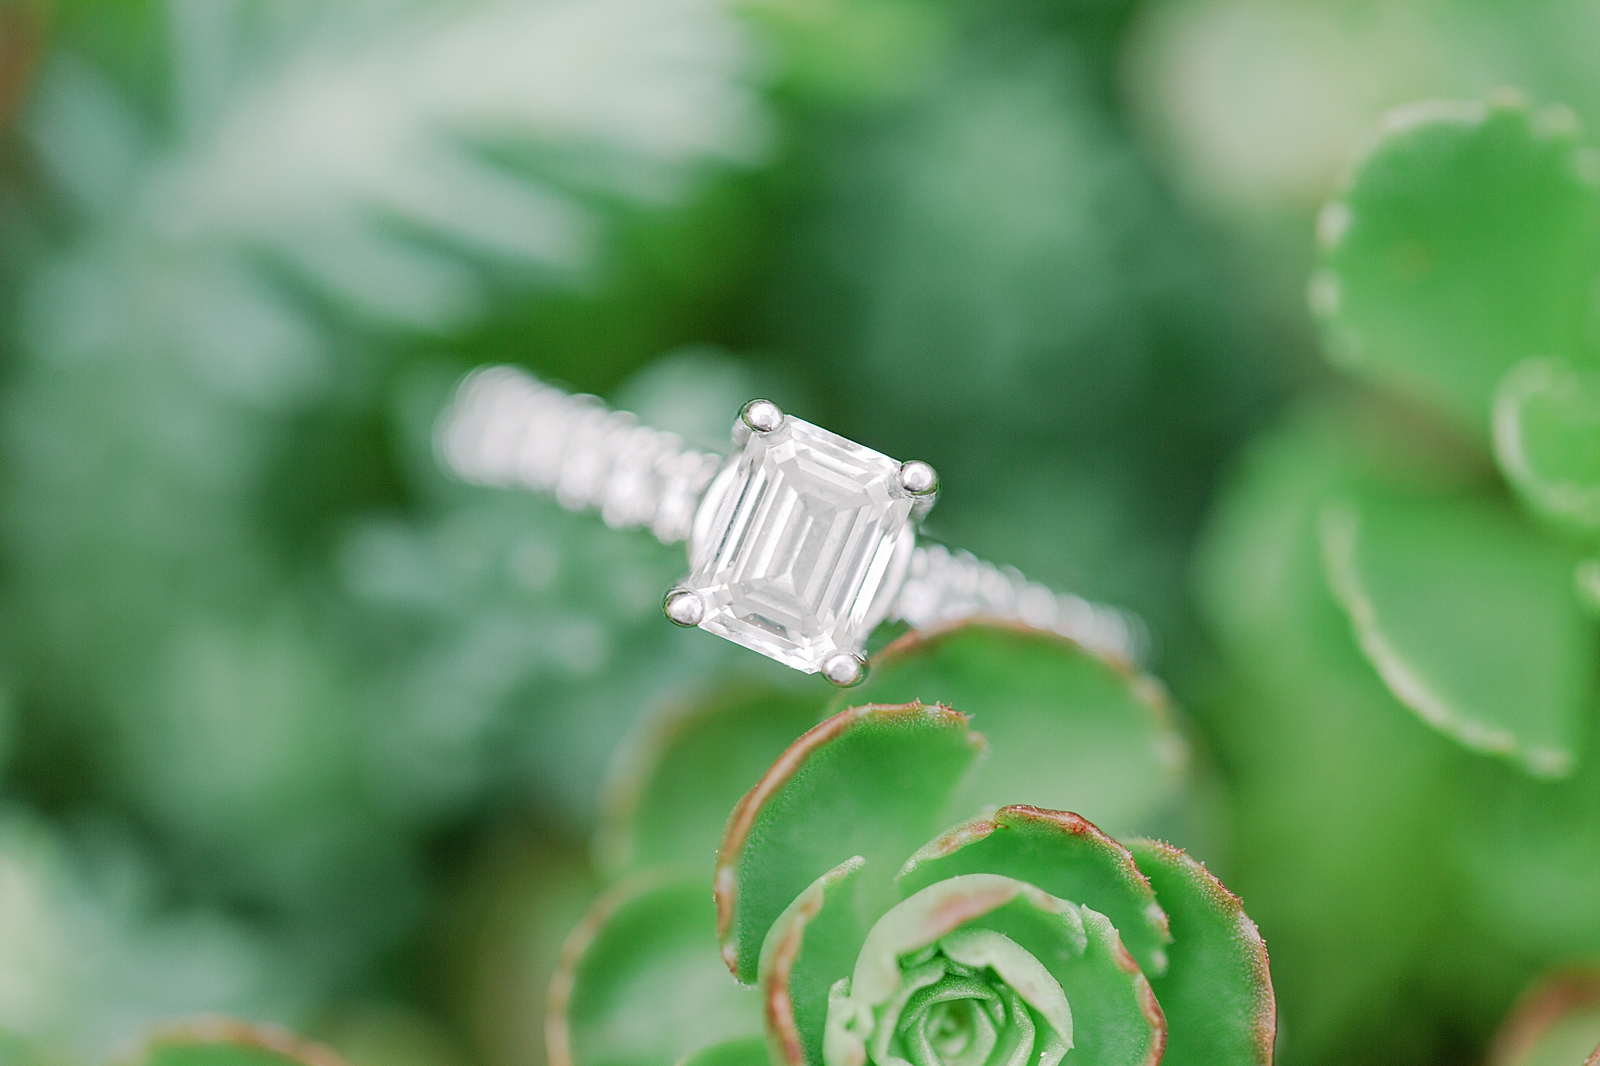 Hackney Warehouse Engagement Session Detail of Ring in Succulent Photo